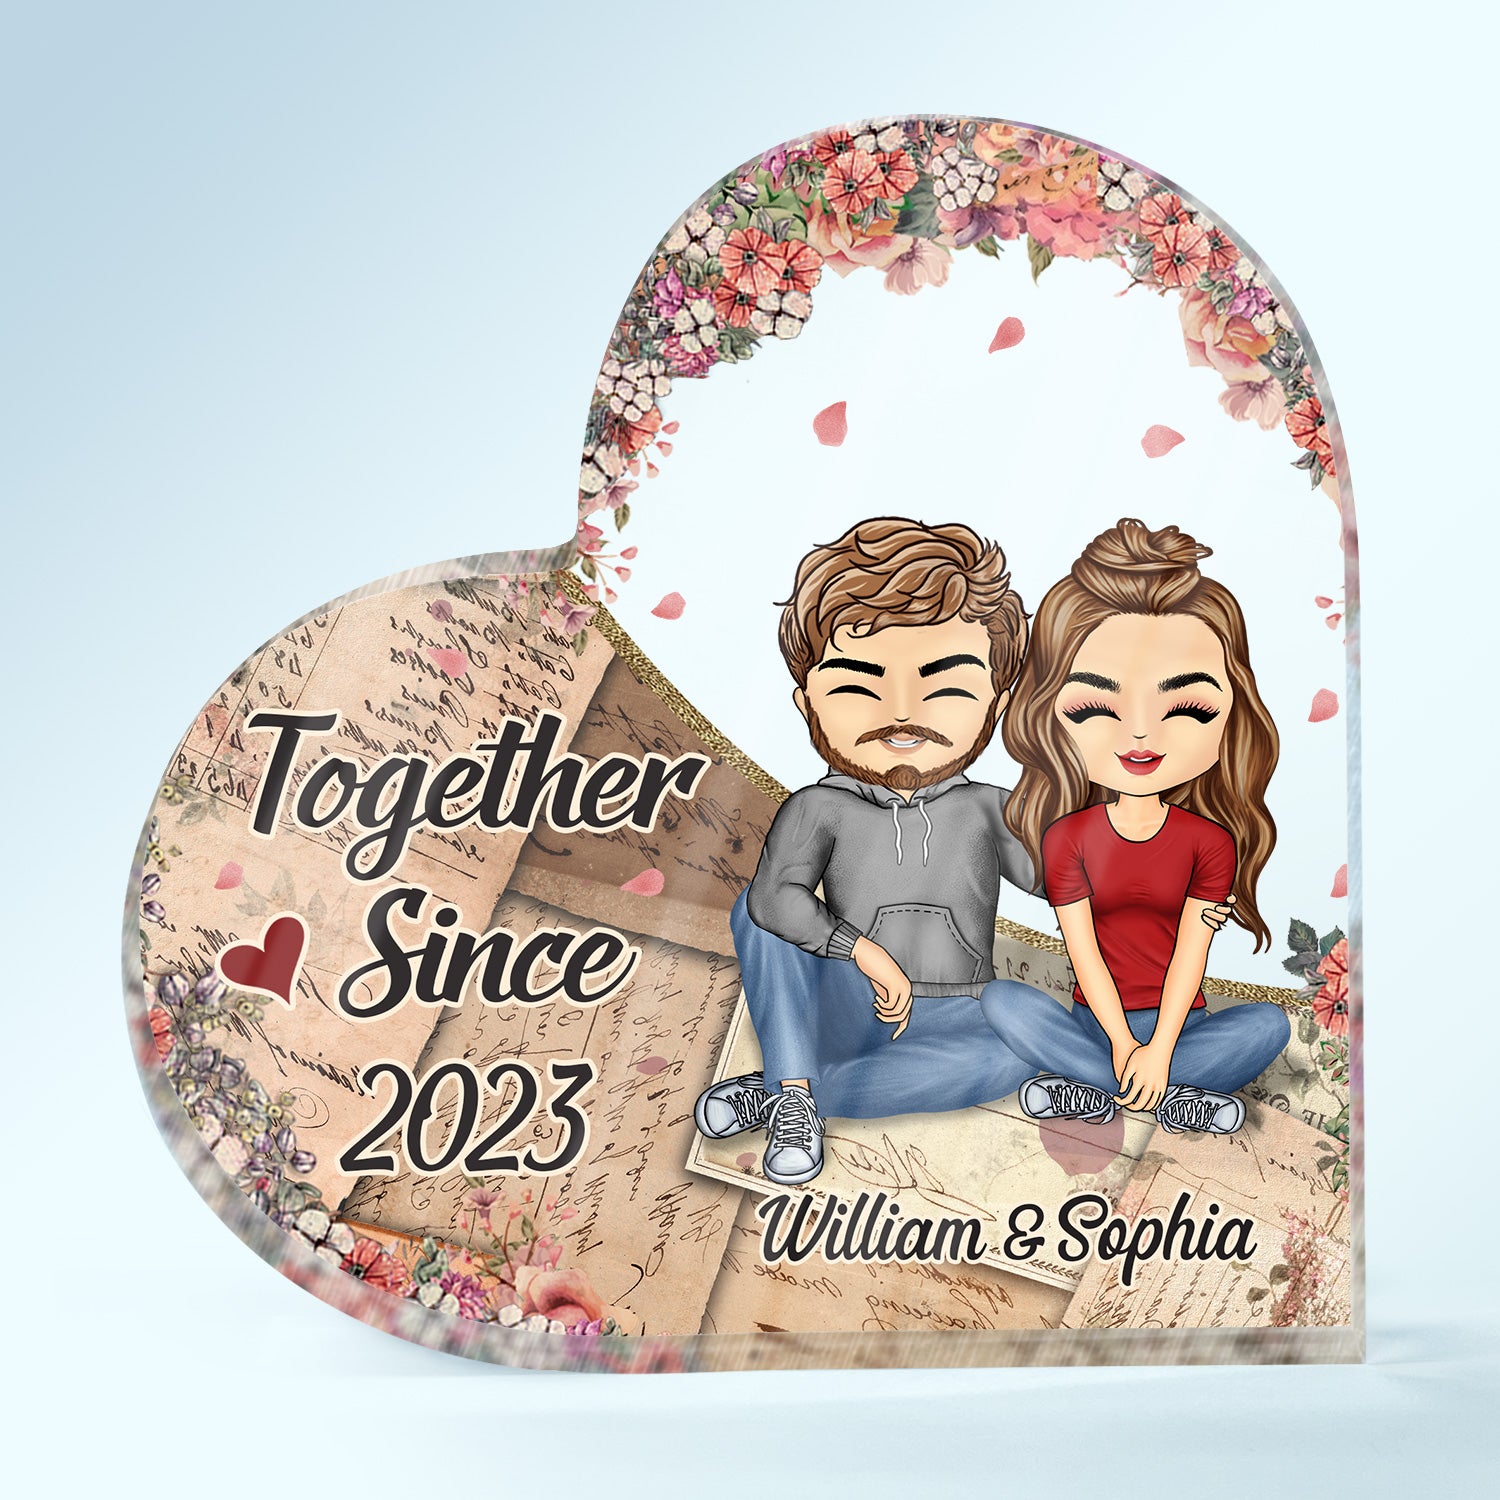 Together Since Husband Wife Couples - Home Decor, Anniversary, Birthday Gift For Spouse, Husband, Wife, Boyfriend, Girlfriend - Personalized Custom Heart Shaped Acrylic Plaque